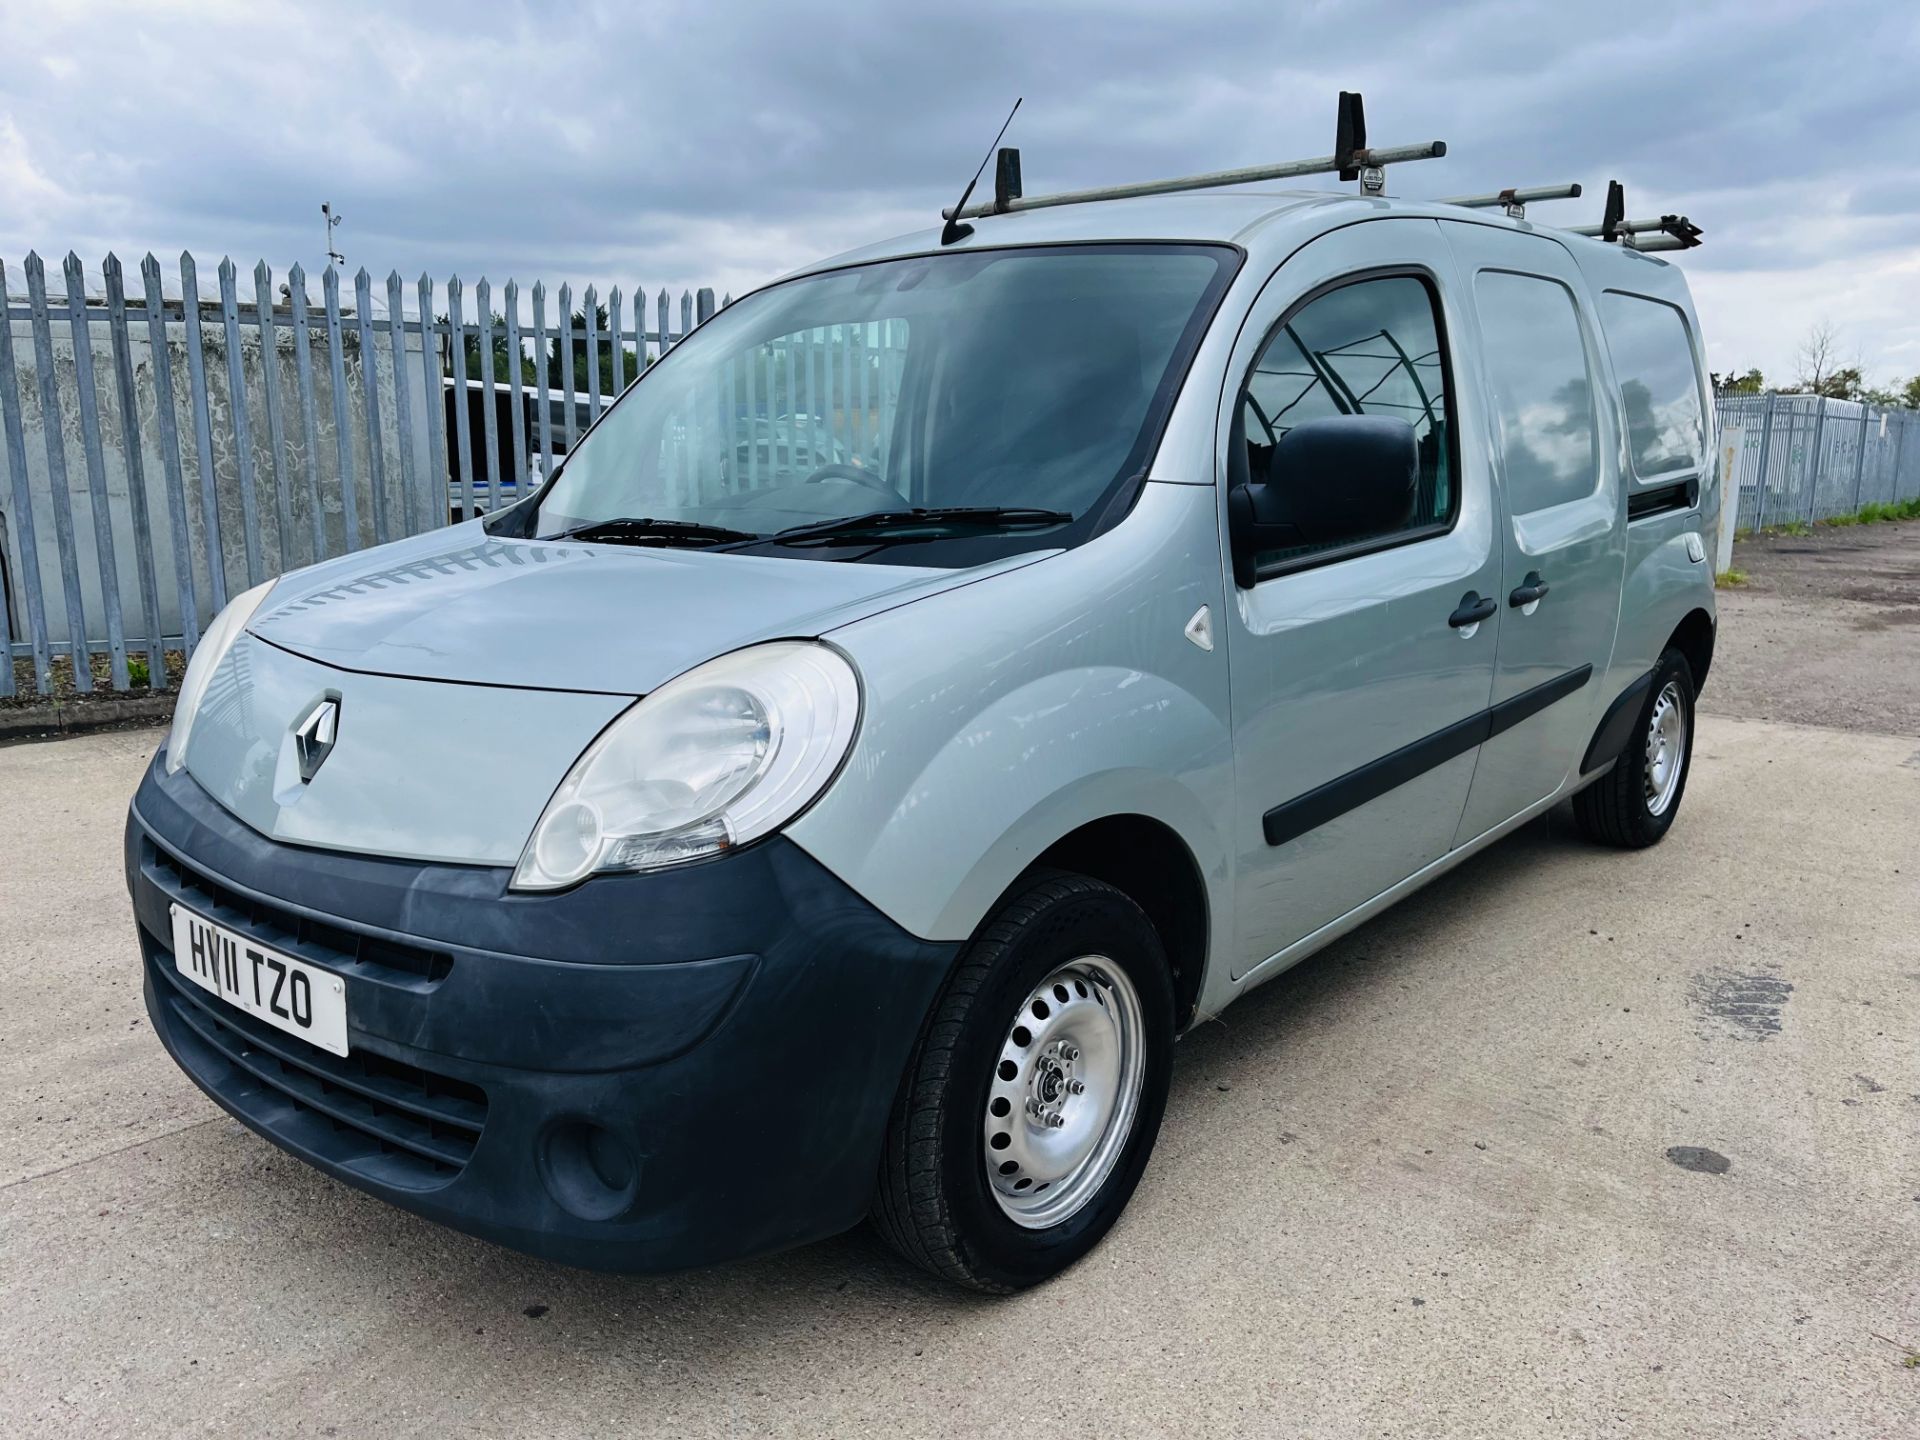 (Reserve Met) Renault Kangoo dci "Maxi Plus" 11reg - Rare and hard to find a Maxi Plus model -No Vat - Image 5 of 18